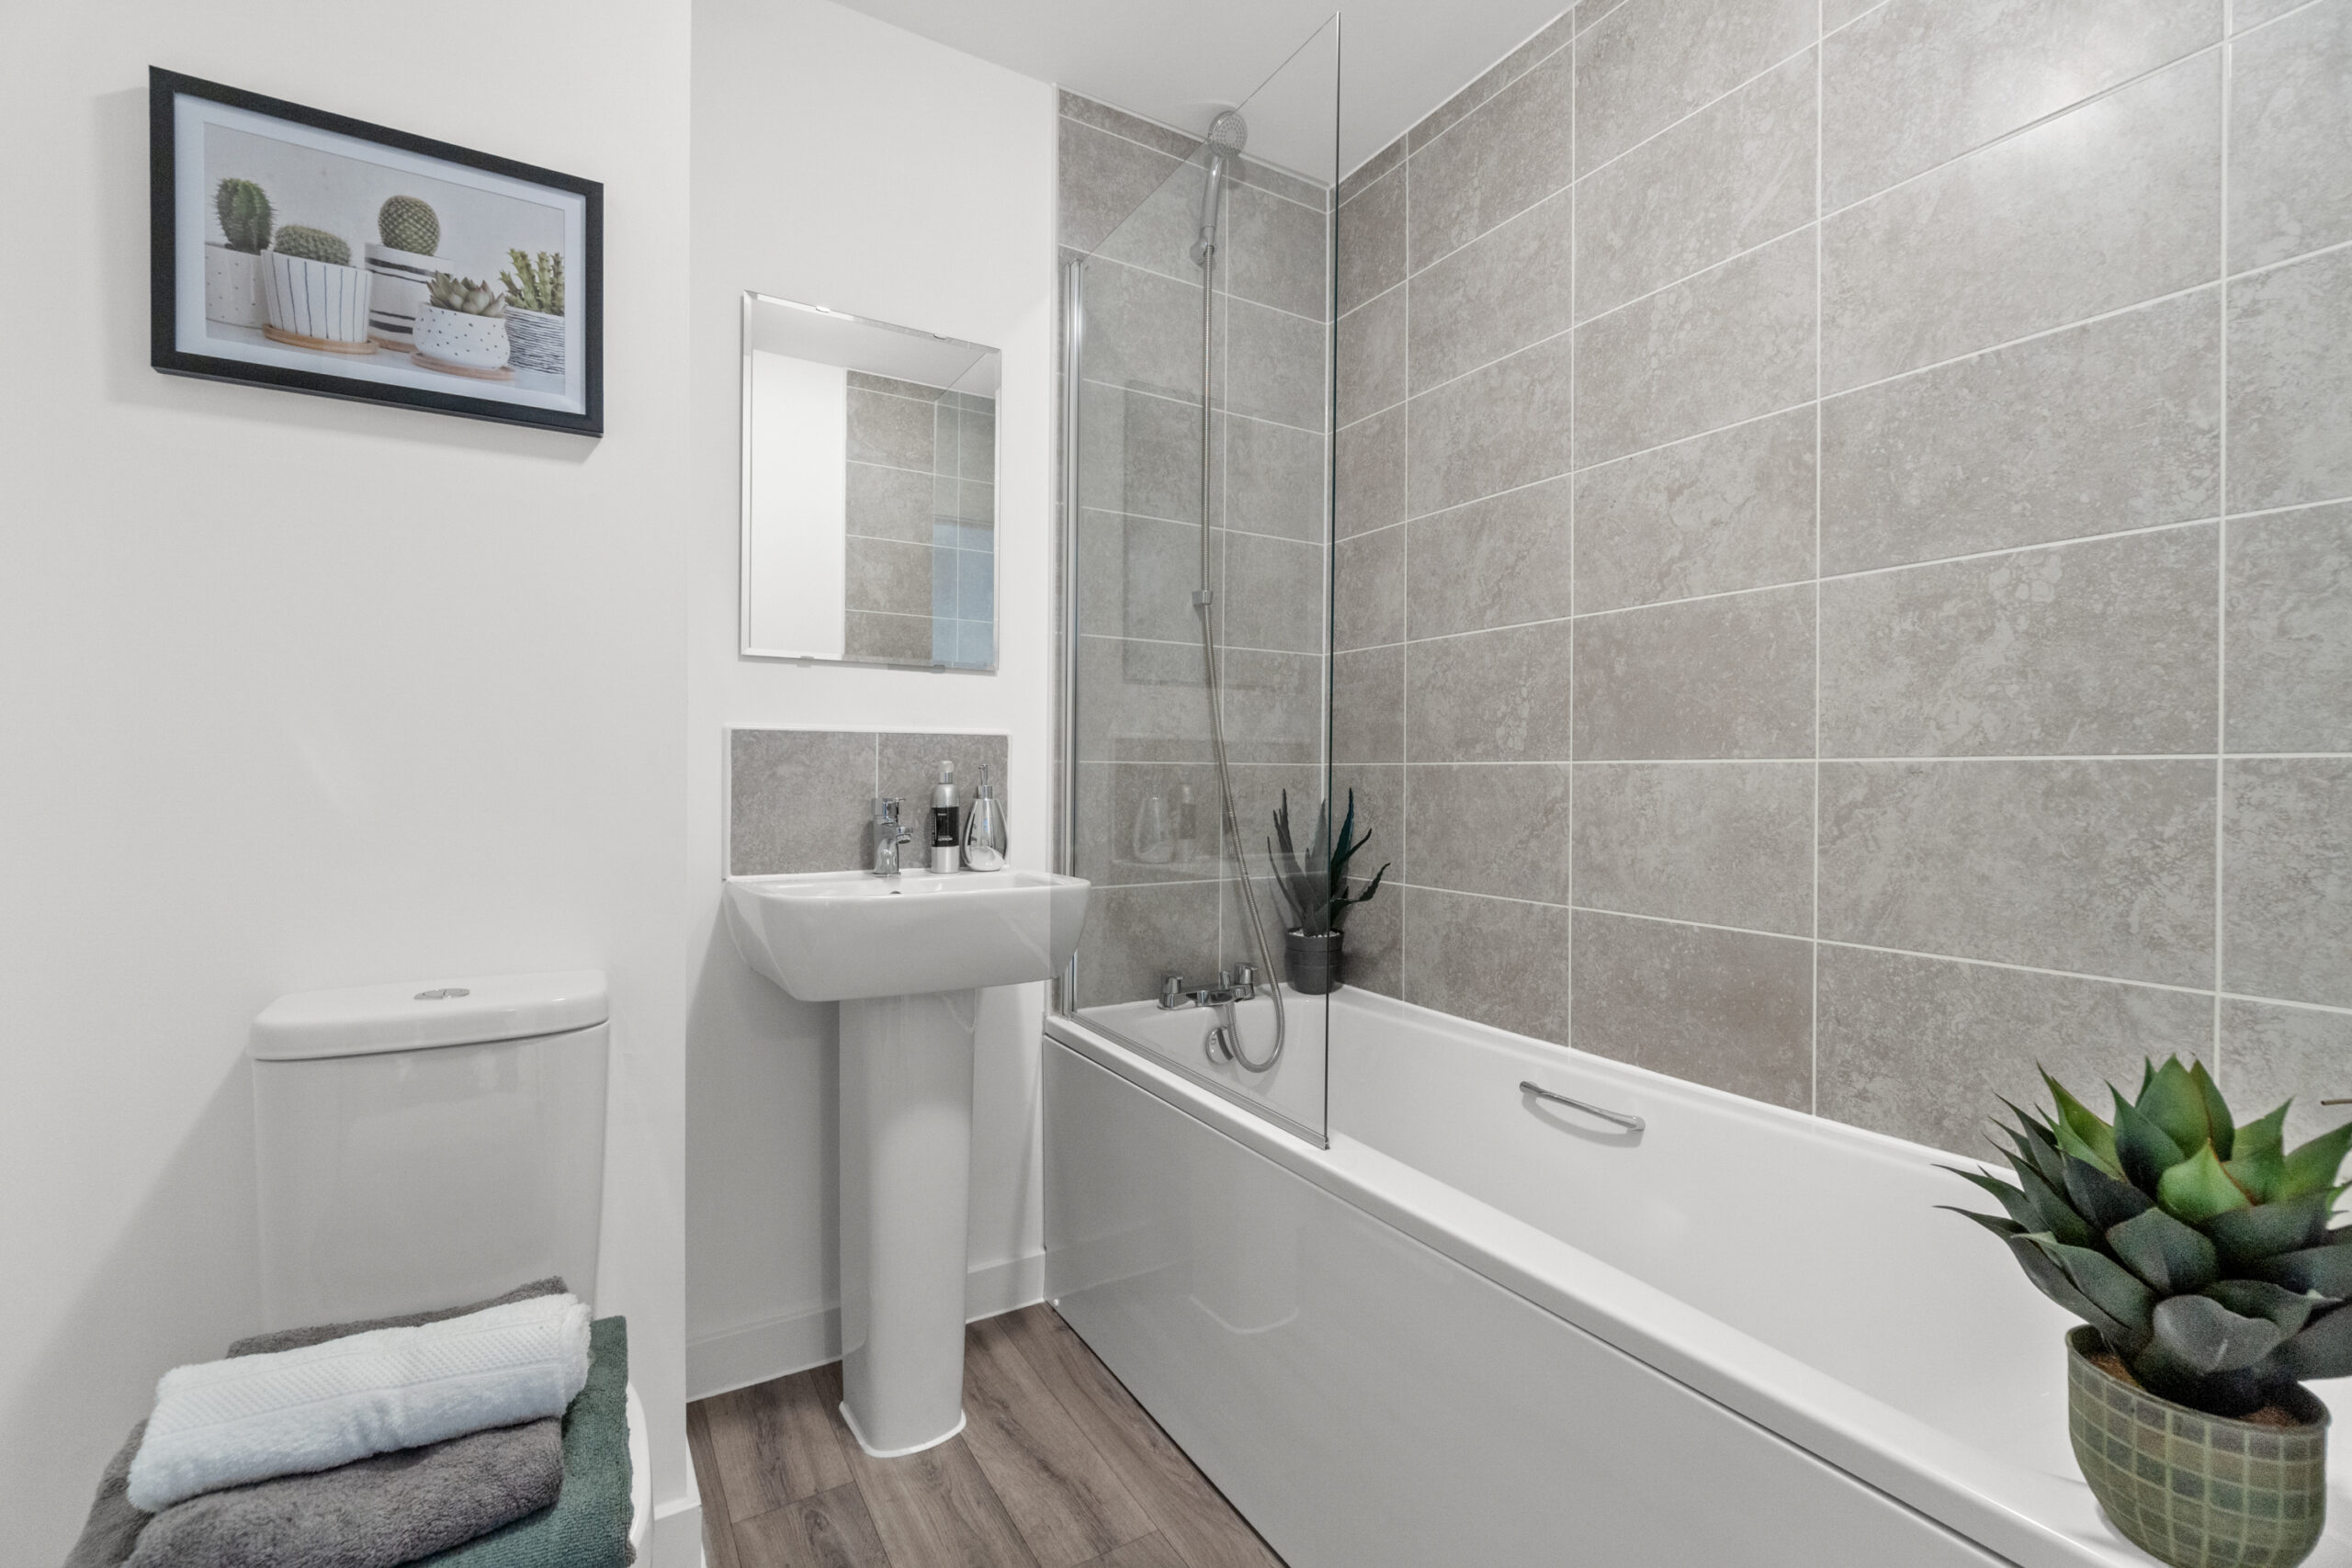 Image of a bathroom at Trevethan Meadows from LiveWest - available to purchase through Shared Ownership on Share to Buy!